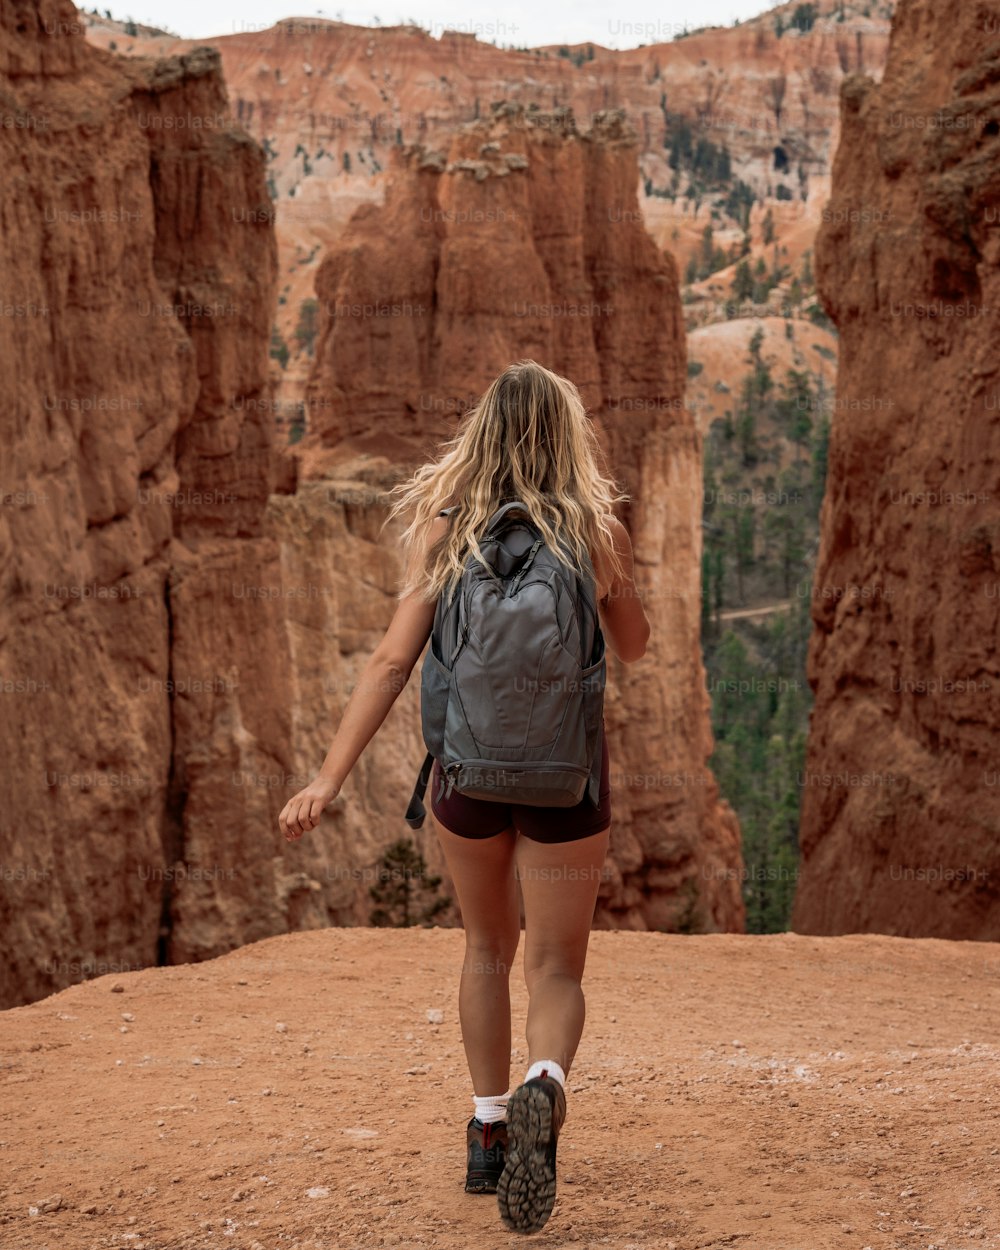 a person walking on a dirt path between large red rock formations